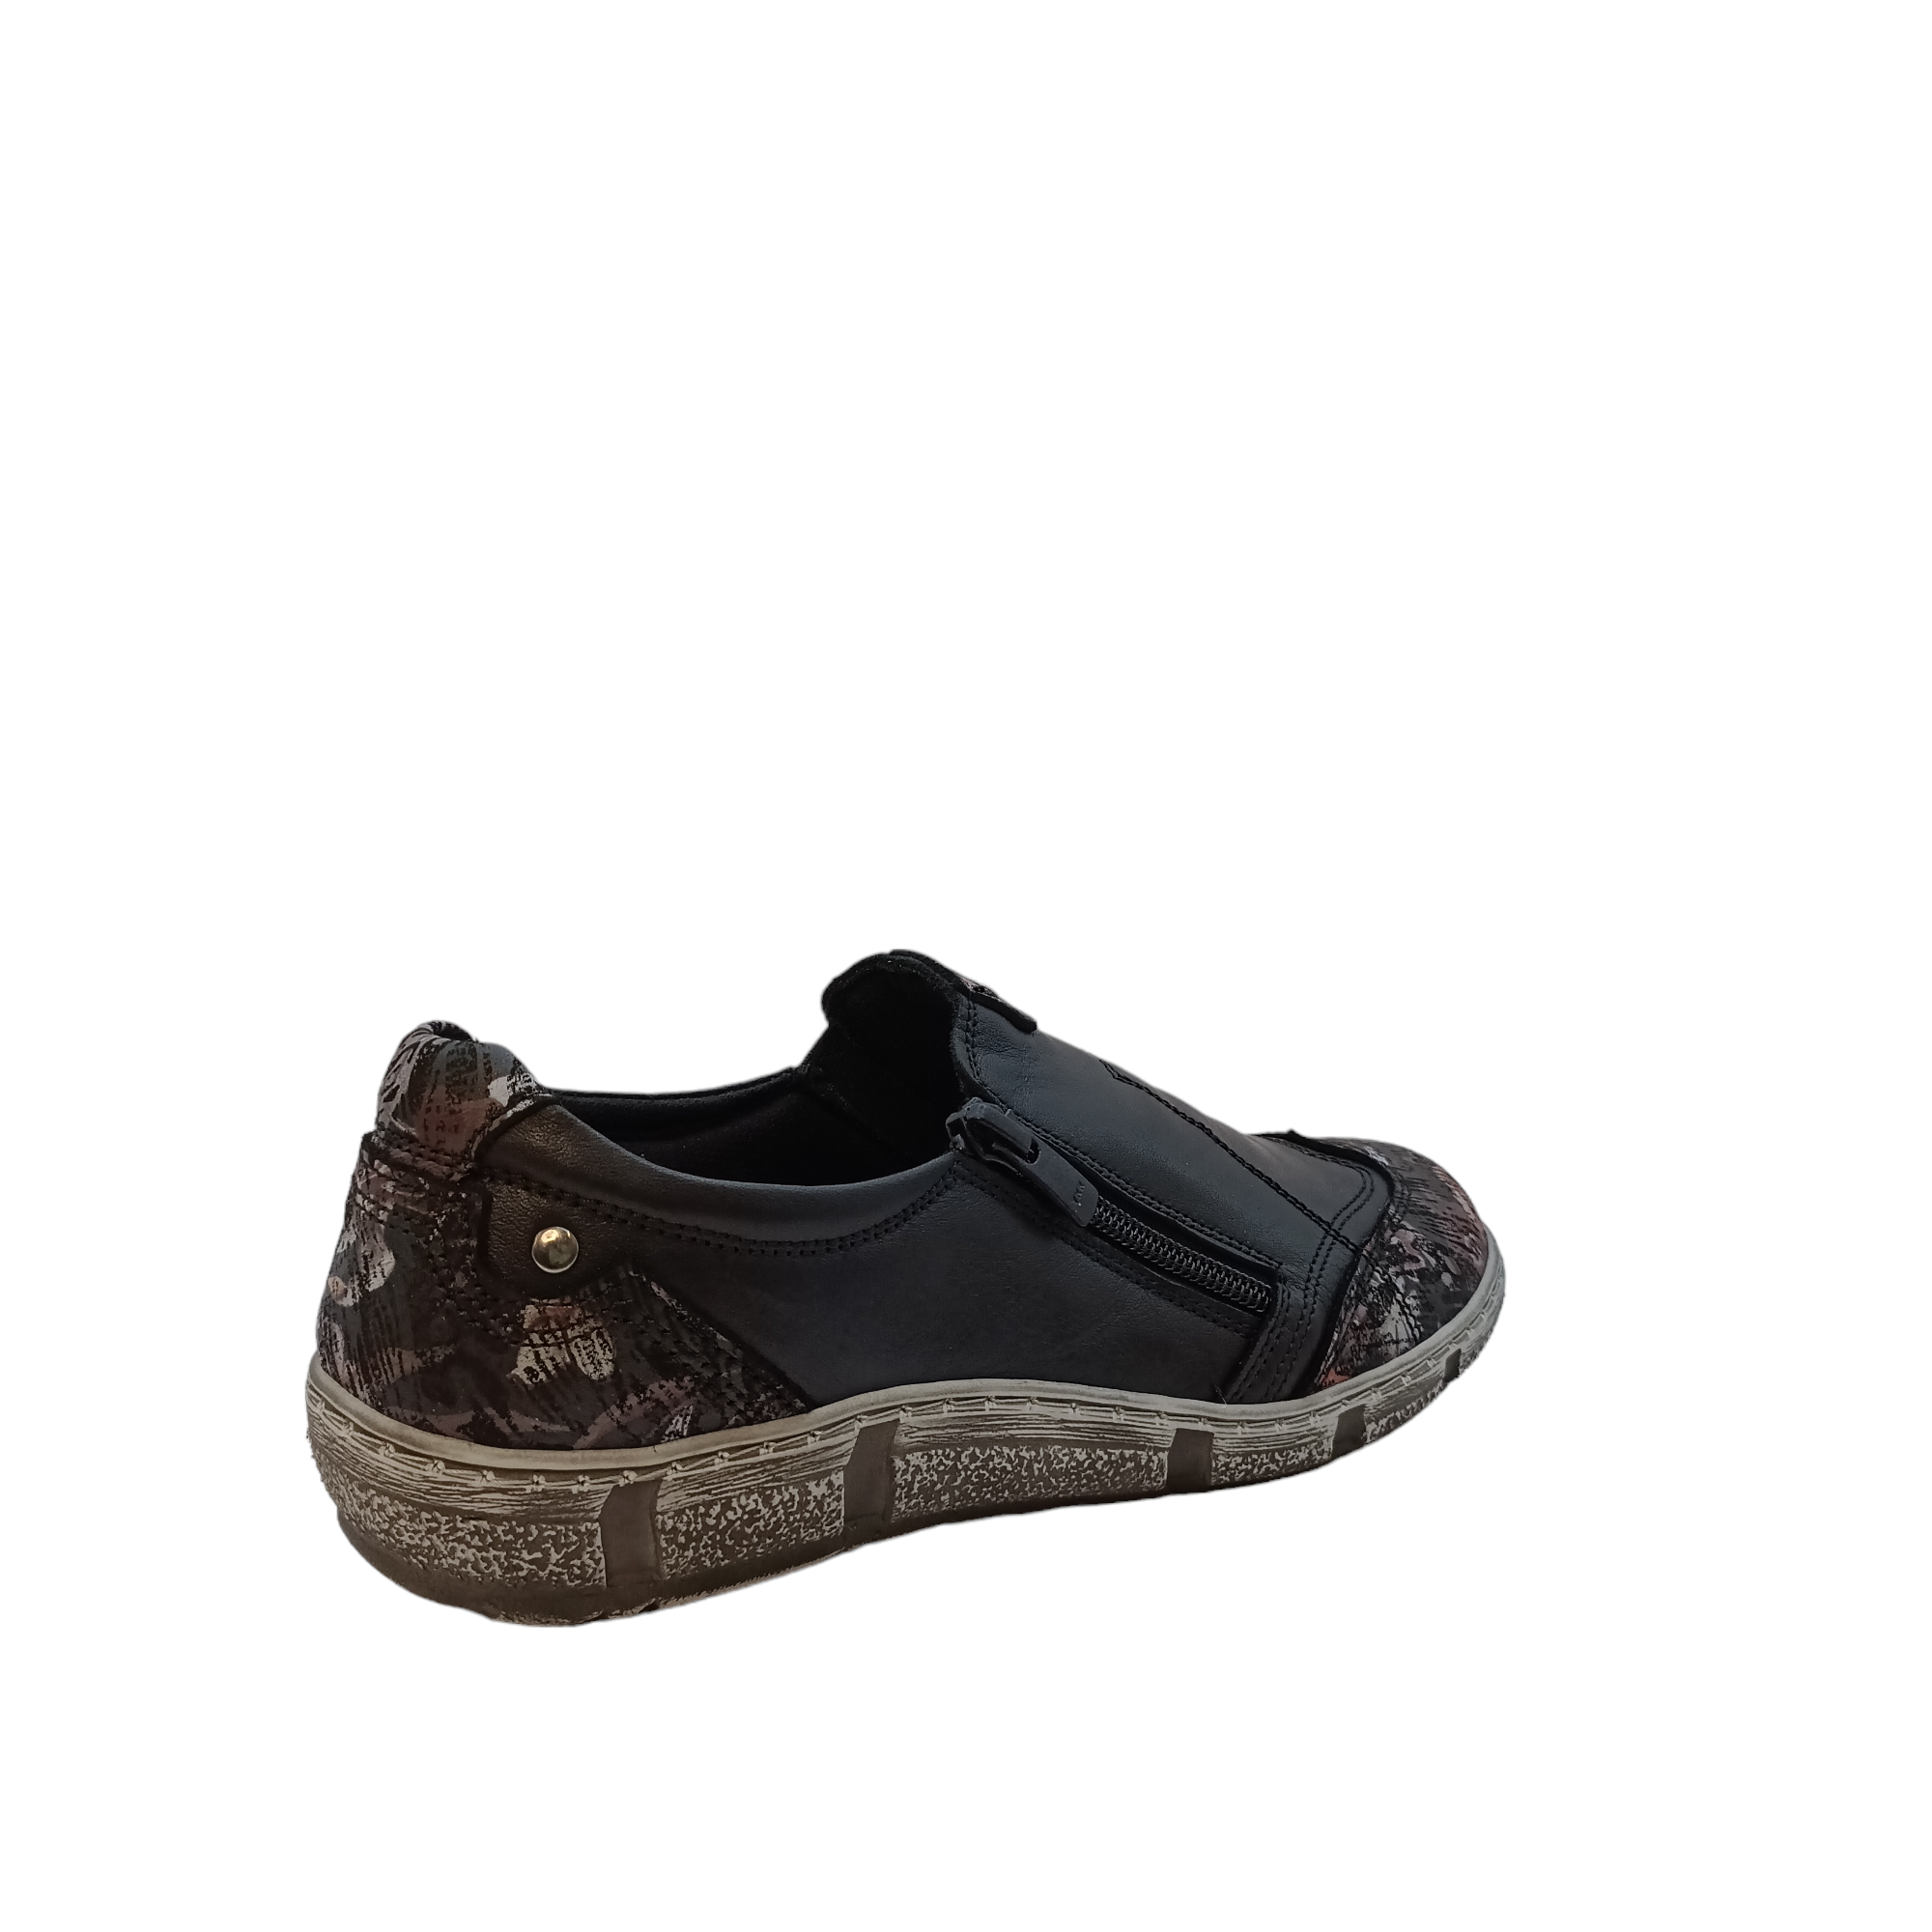 Shop CP794-57 Cabello - with shoe&amp;me - from Cabello - Shoes - Shoe, Winter, Womens - [collection]